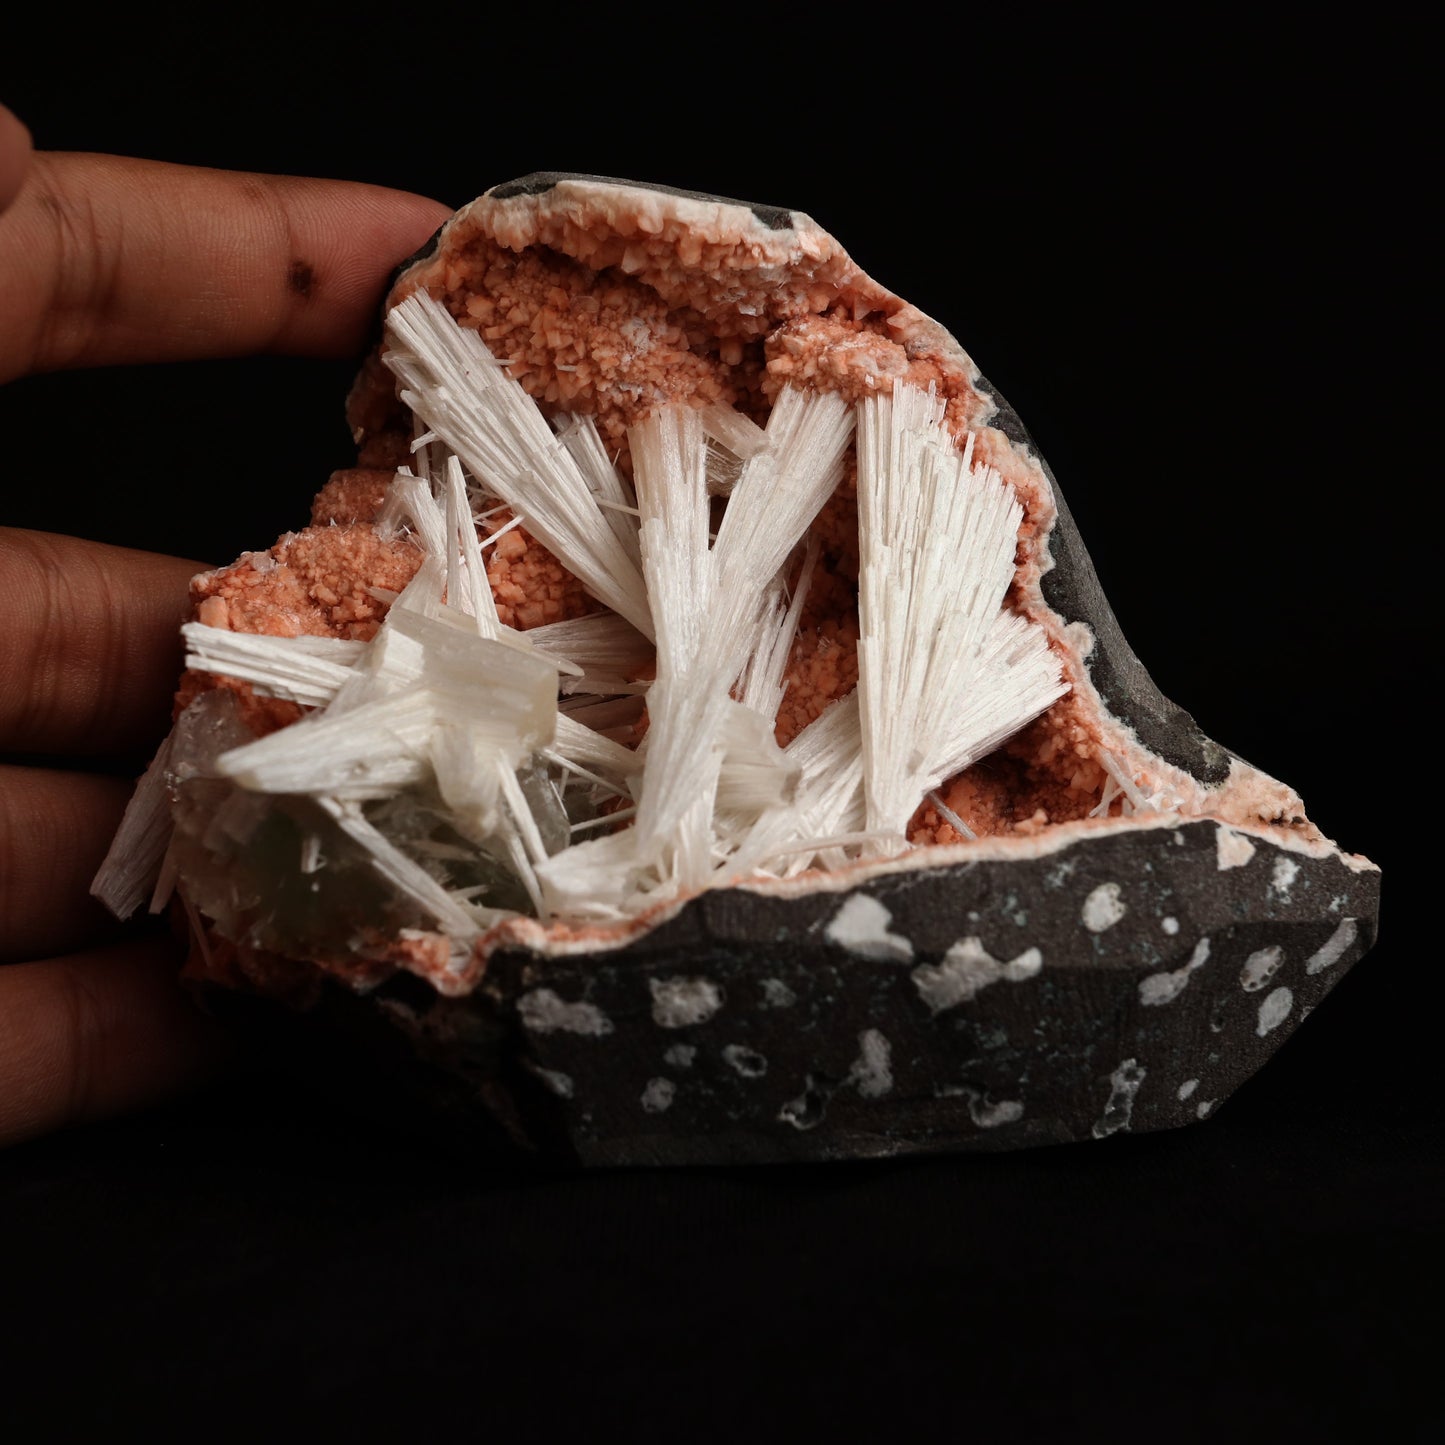 Scolecite Sprays Inside Heulandite Geode Natural Mineral Specimen # B…  https://www.superbminerals.us/products/scolecite-sprays-inside-heulandite-geode-natural-mineral-specimen-b-5034  Features:&nbsp;A big, free-standing Geode bordered with peach-colored Heulandite crystals and including two clusters of beige Stilbite crystals. The Geode is a three-dimensional object that is tall, thin, and deep.Very attractive and in great condition. 